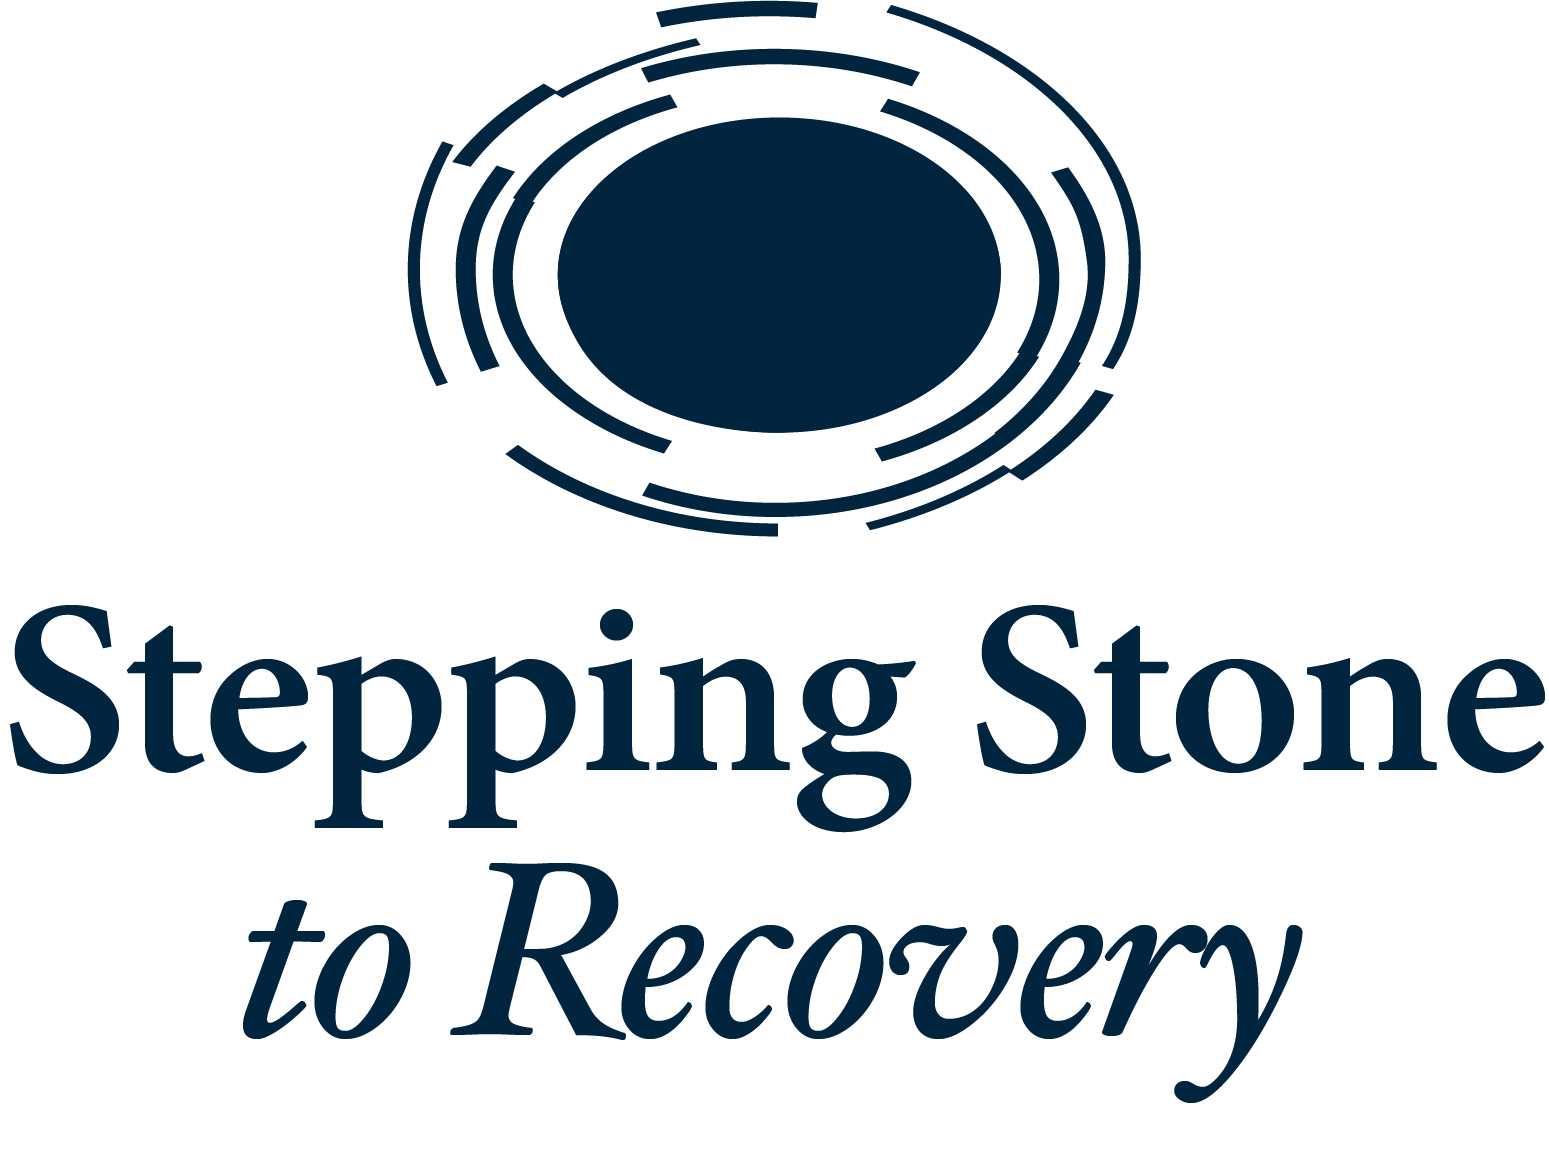 Cornerstone of Recovery in Knoxville TN Drug and Alcohol Rehab